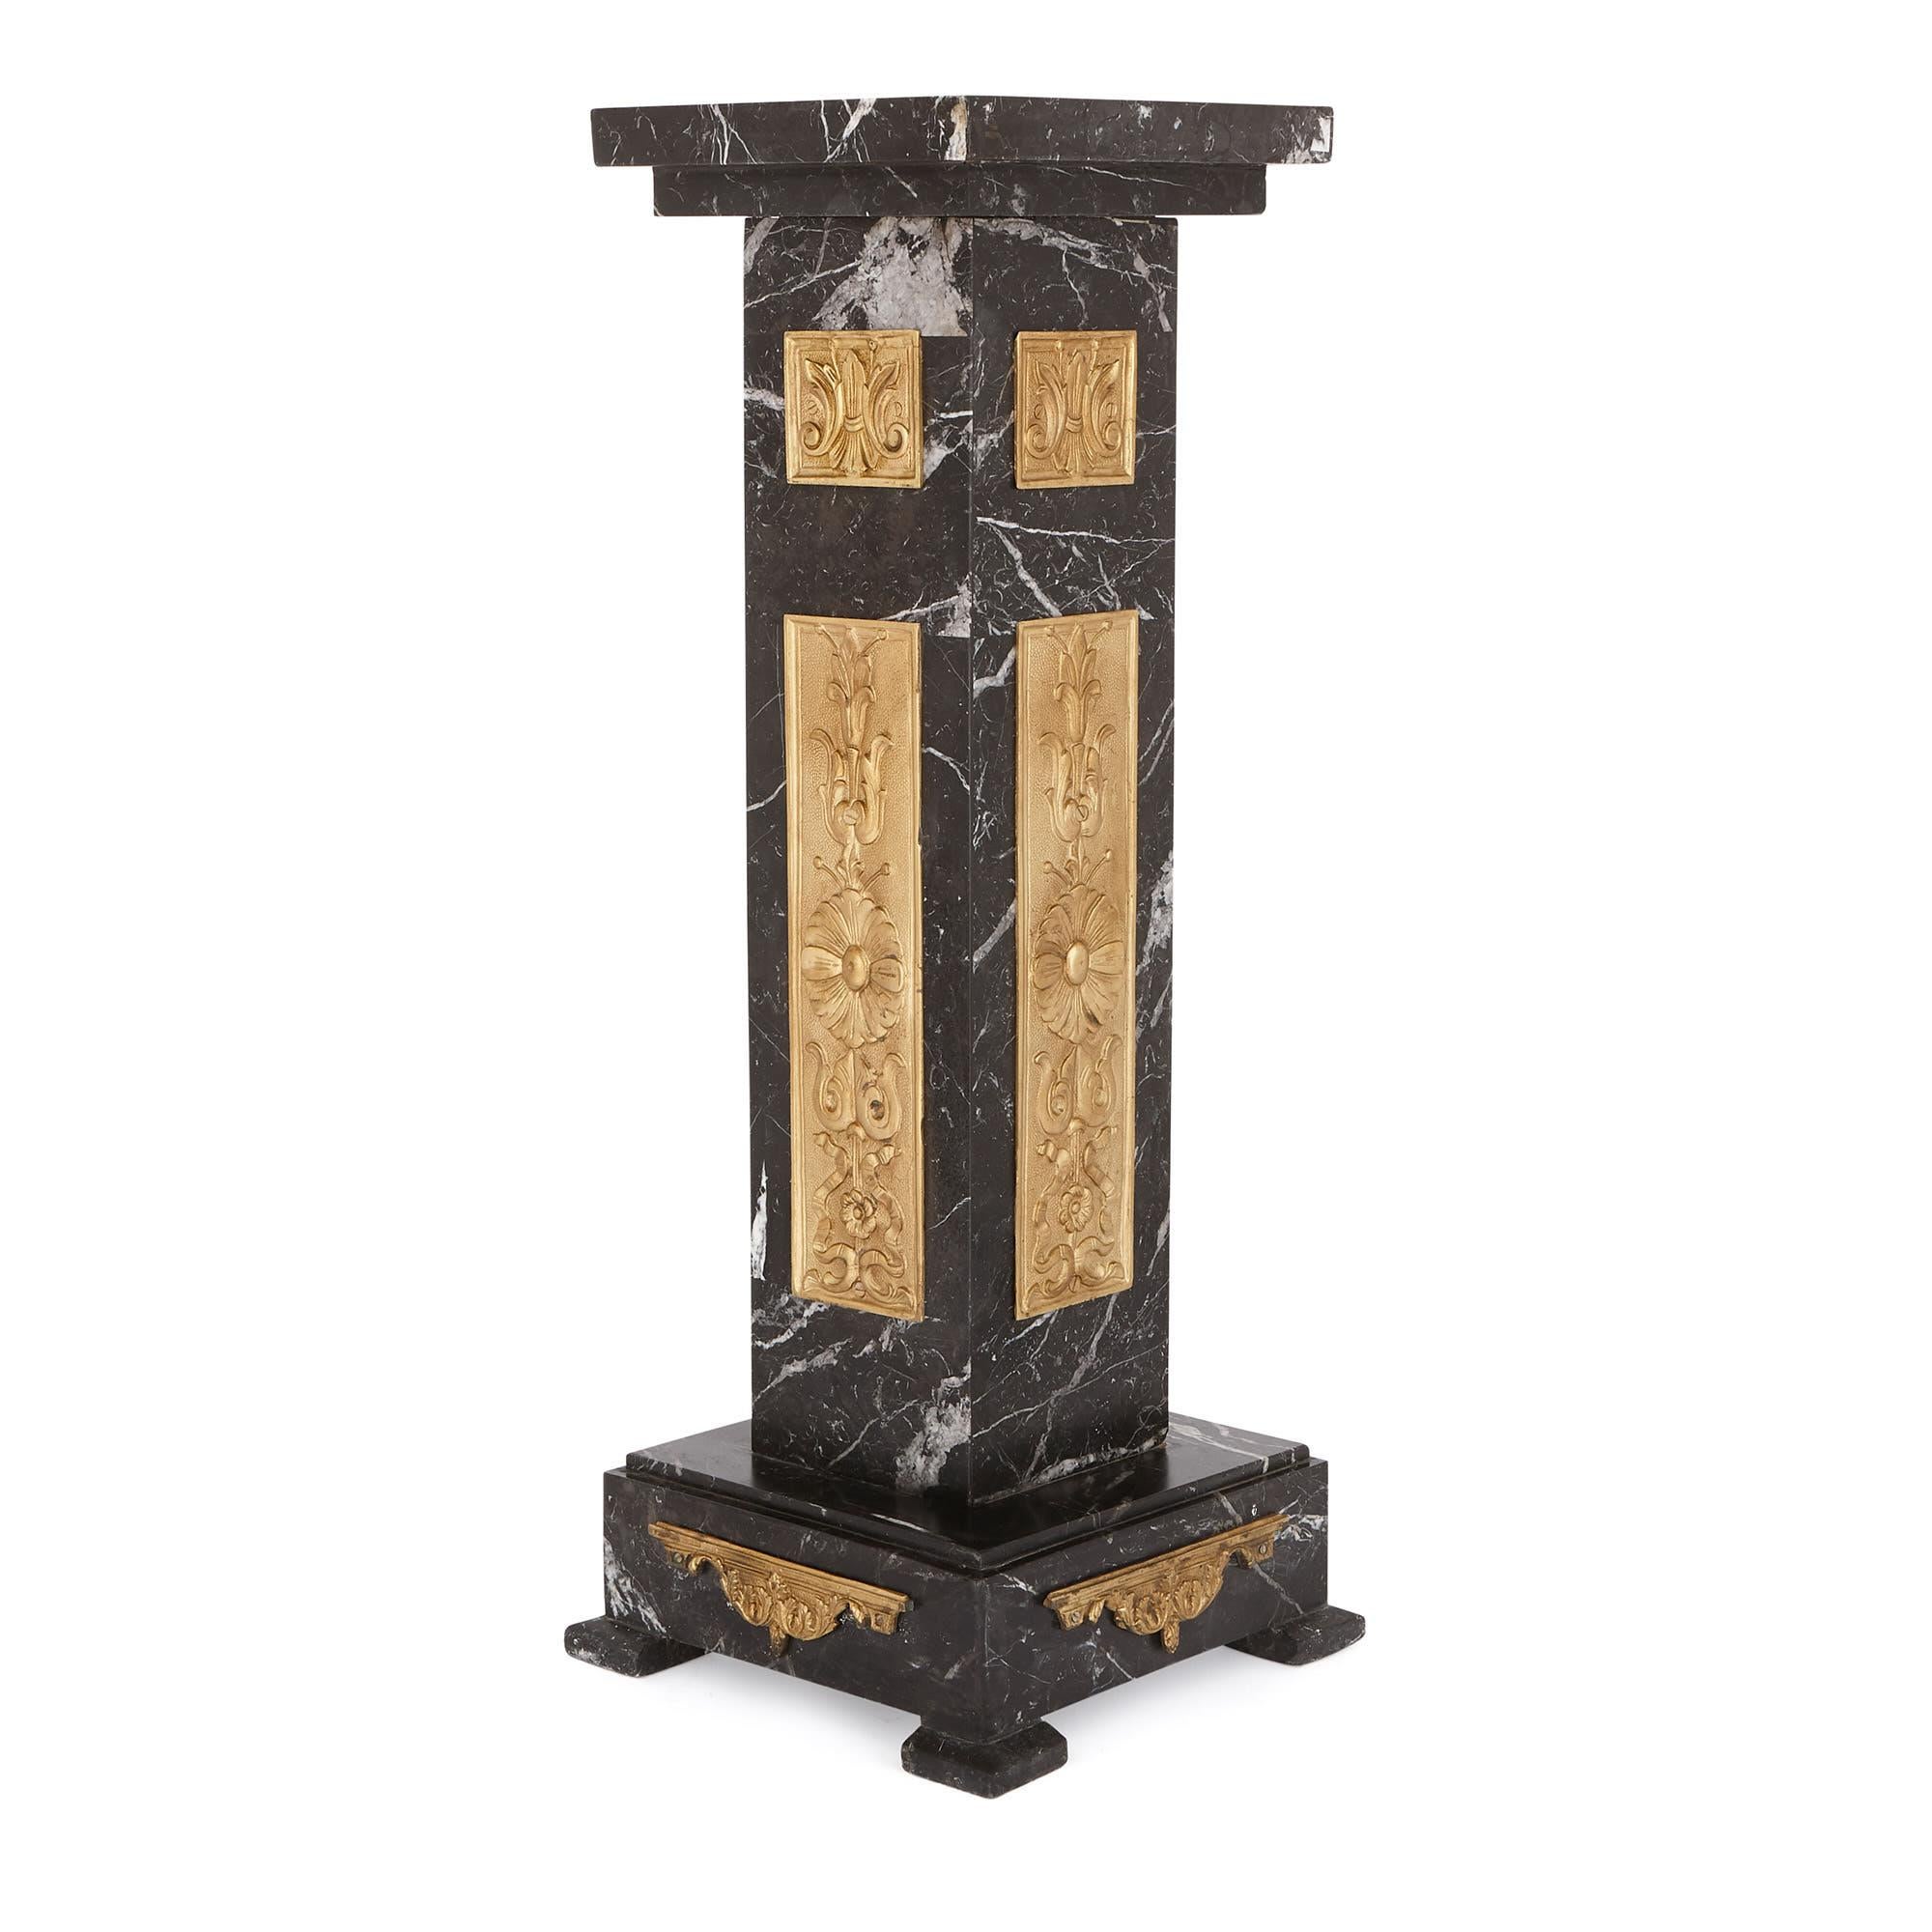 These stylish black marble stands (or pedestals) were designed in France in the 1920s, when the Art Deco style was all the rage. In a reaction against the linear, sinuous character of the Art Nouveau, the Art Deco was largely characterized by